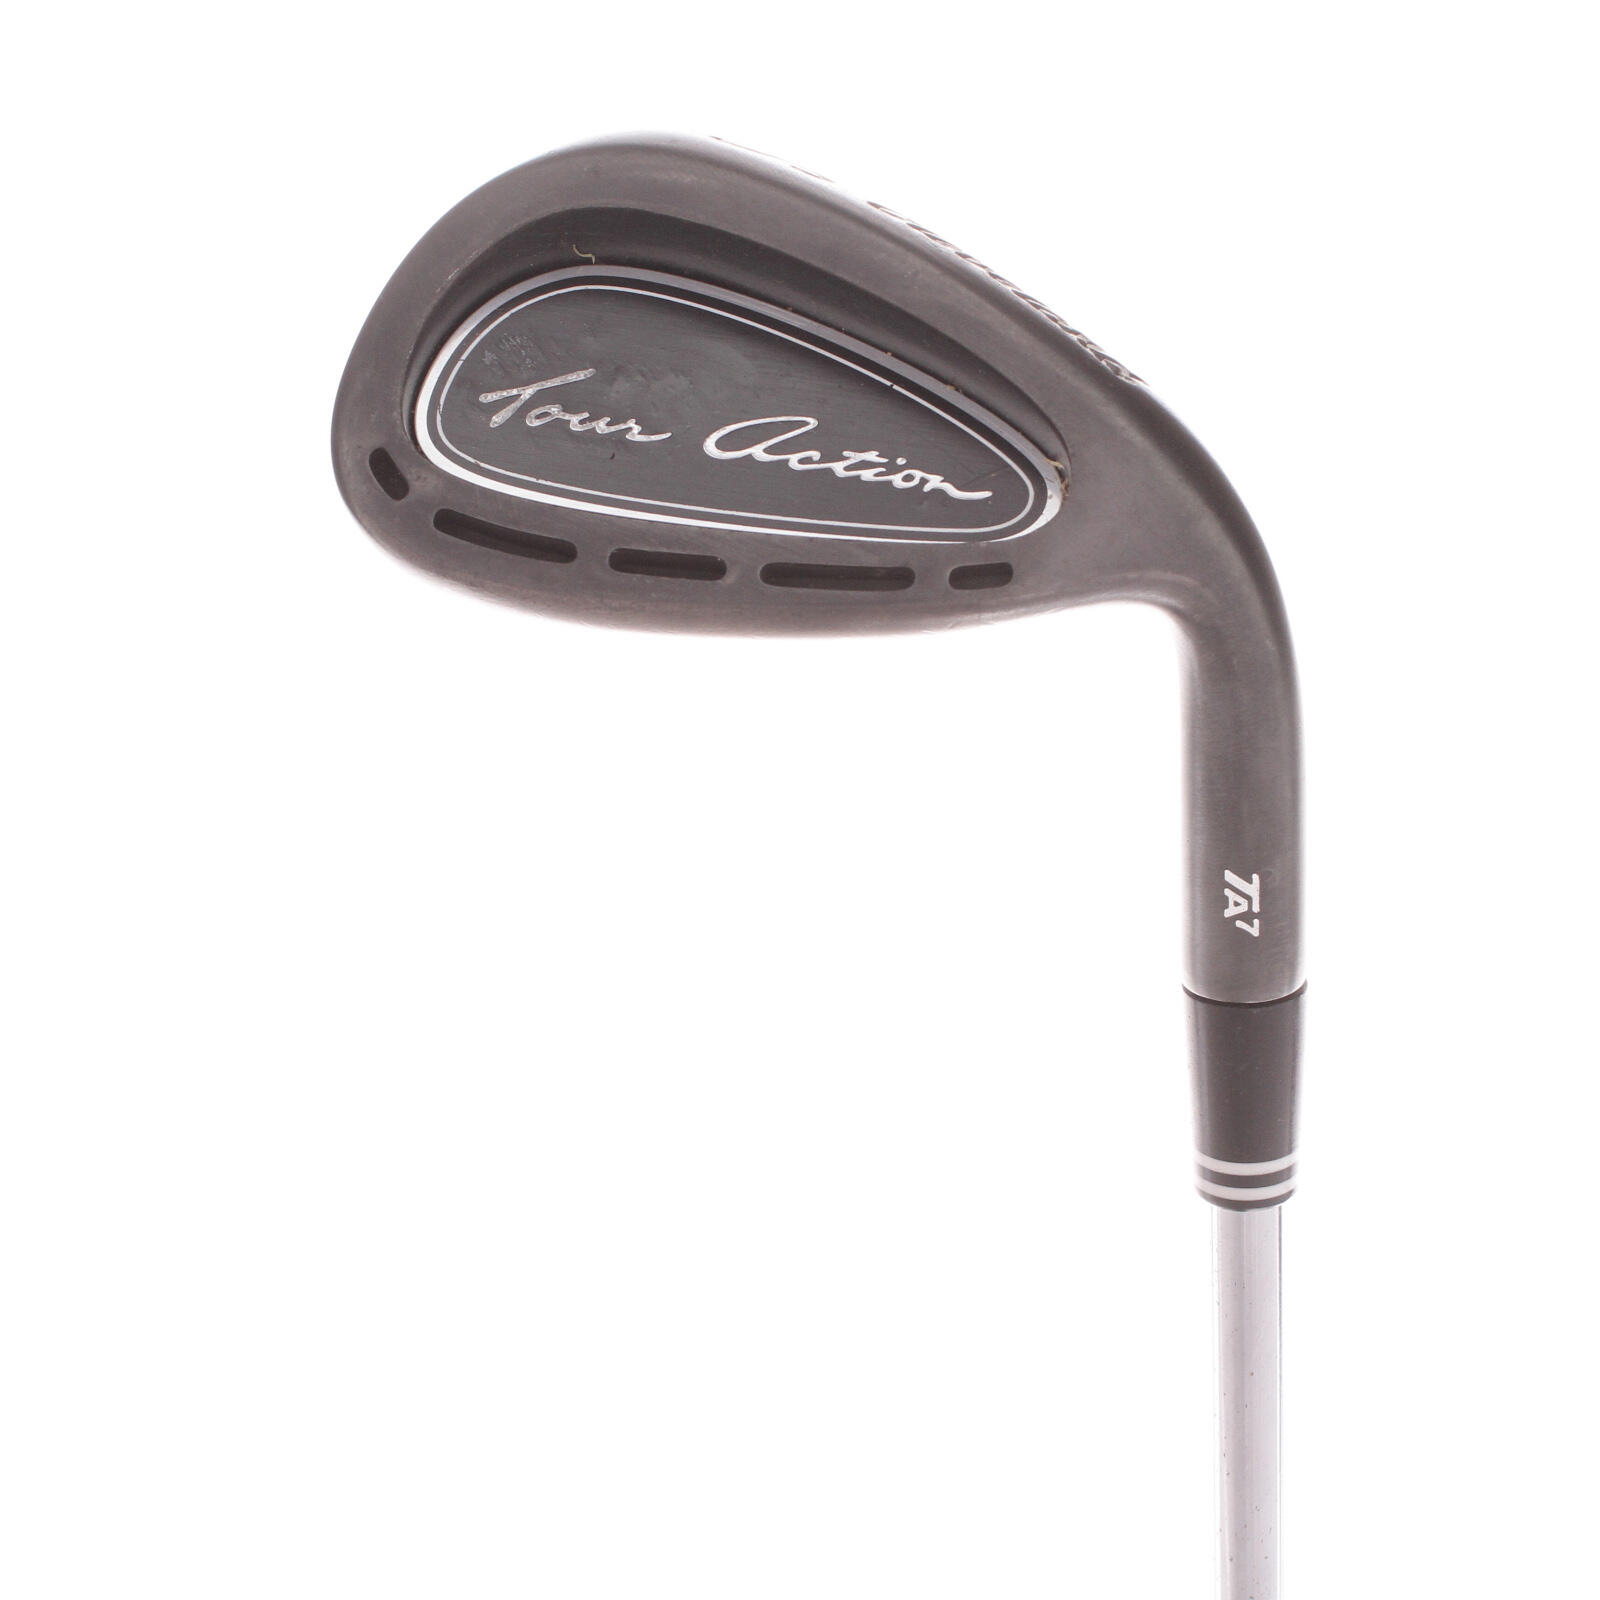 CLEVELAND GOLF USED - Sand Wedge Cleveland Tour Action 56* Uniflex Flex Right Handed - GRADE B